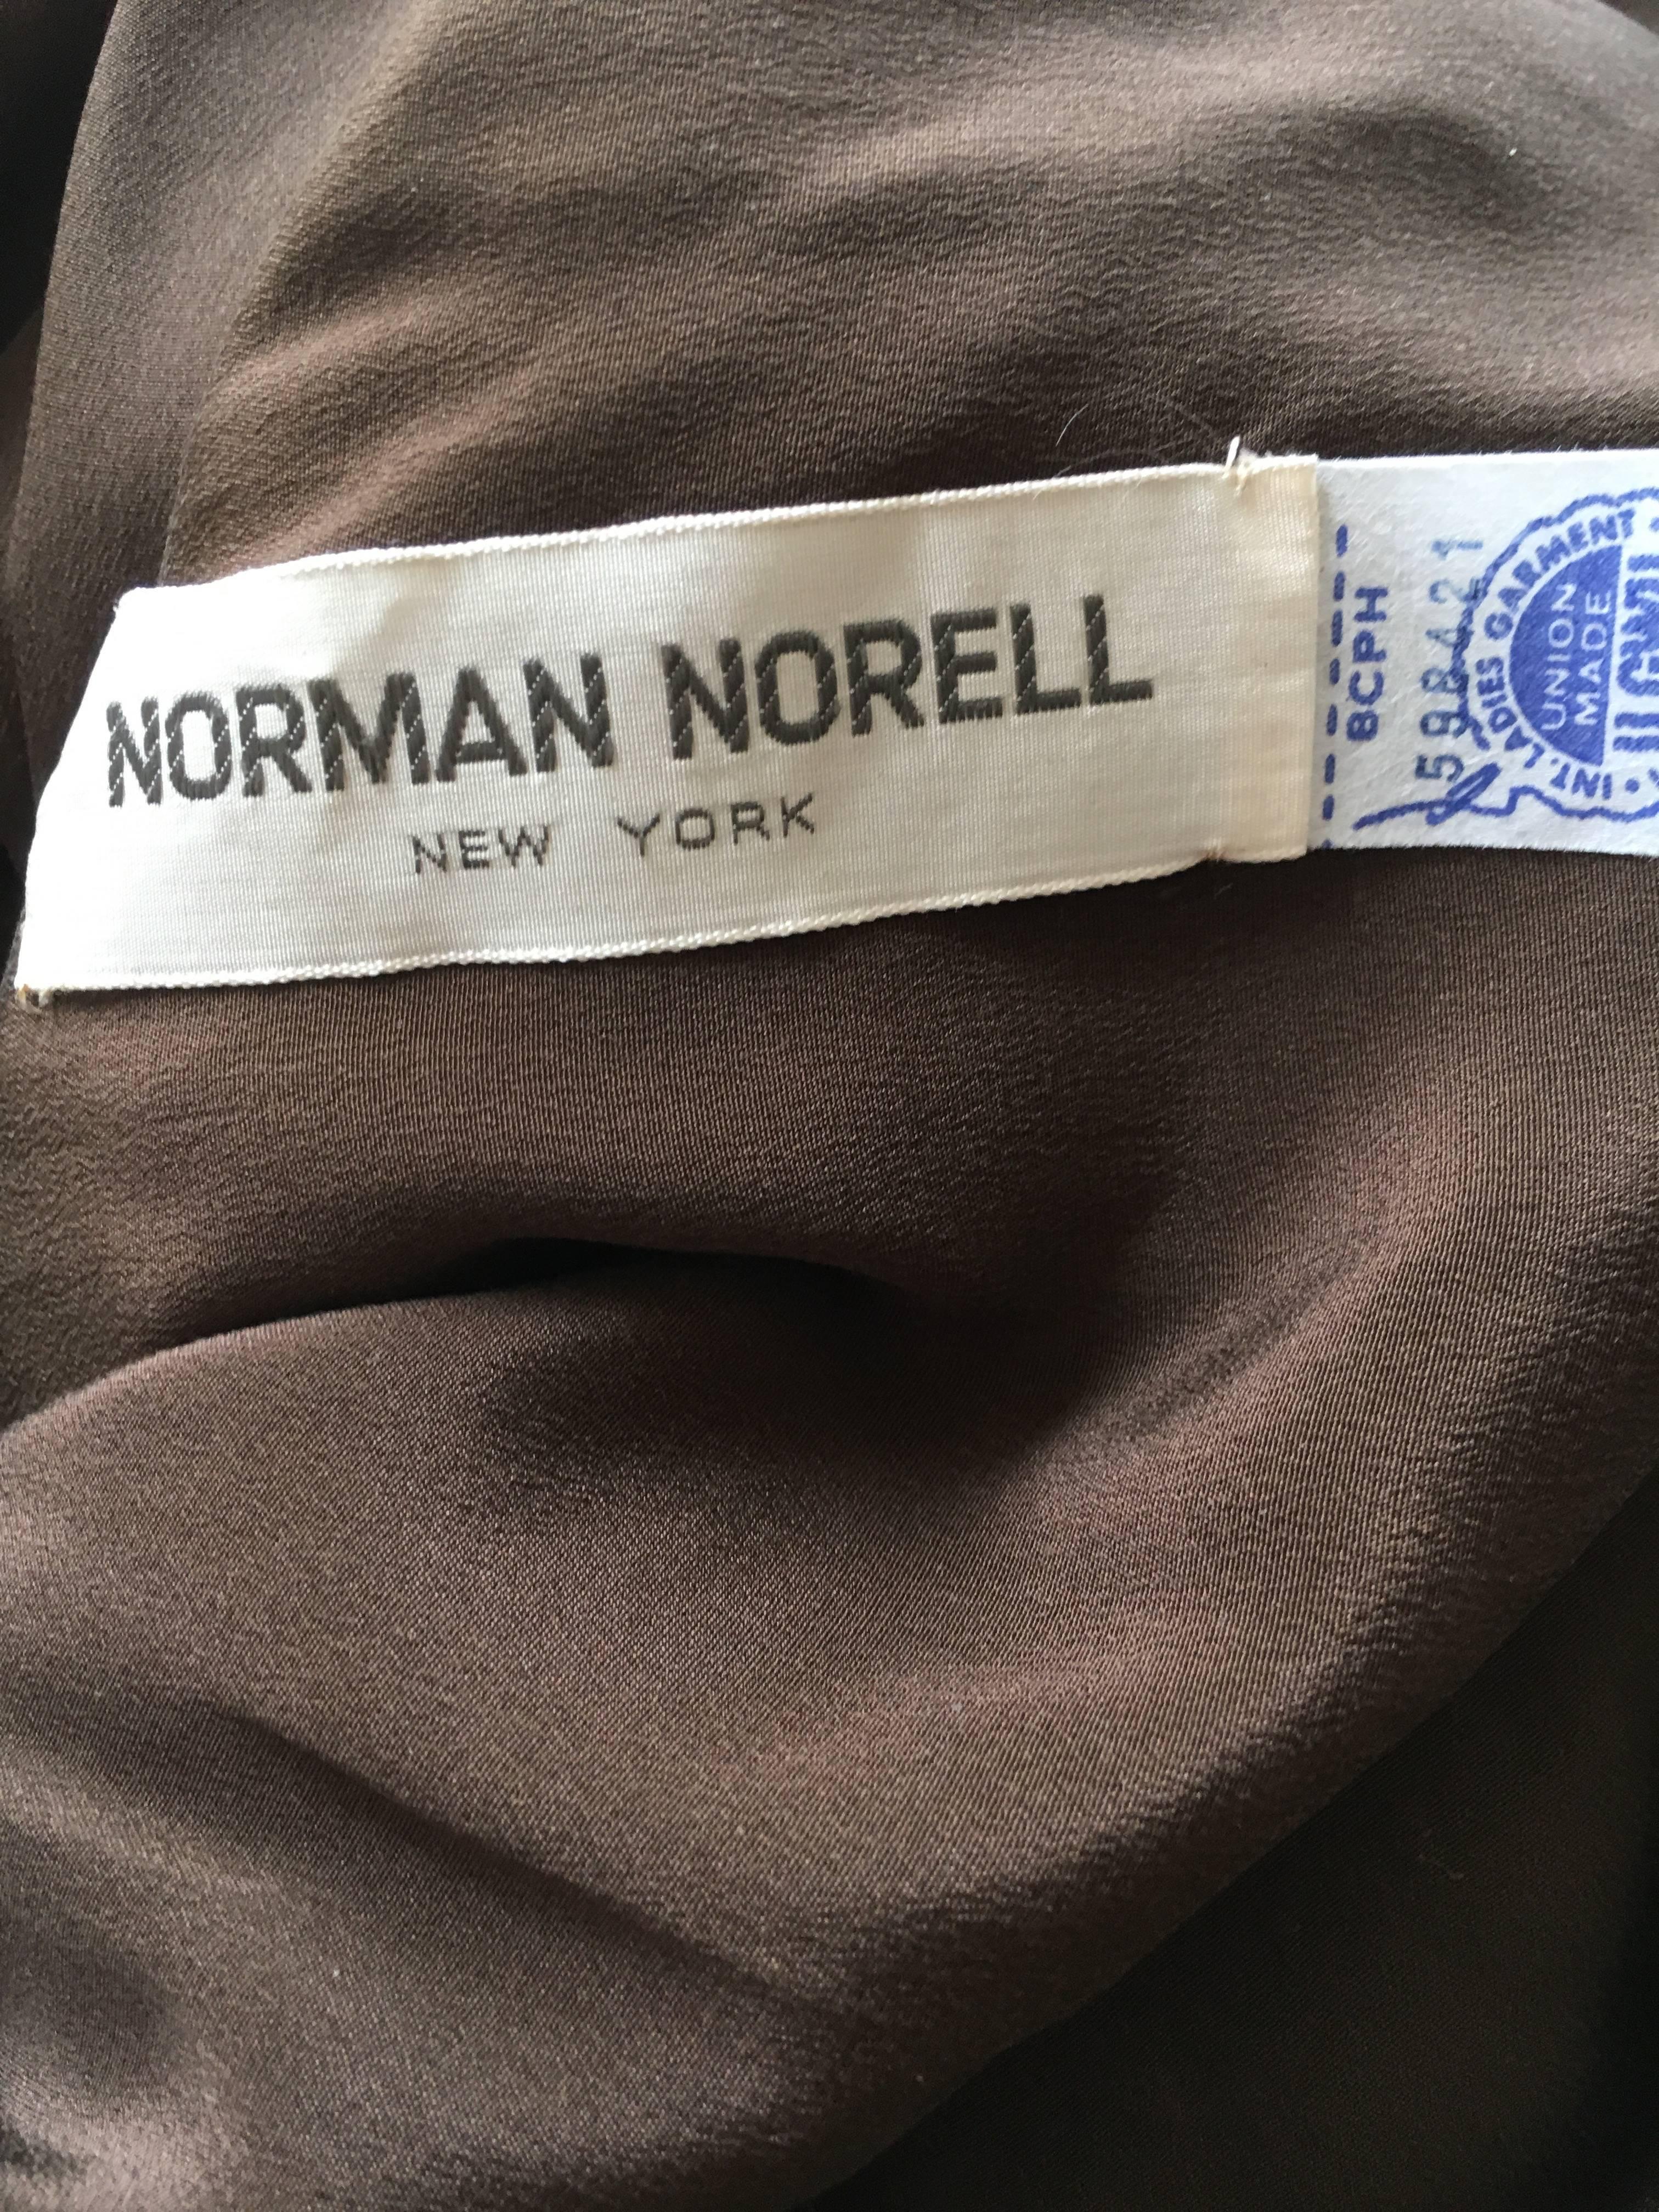 Norman Norell 1960's Sequin Cocktail Dress with Attached Bow Belt For Sale 1